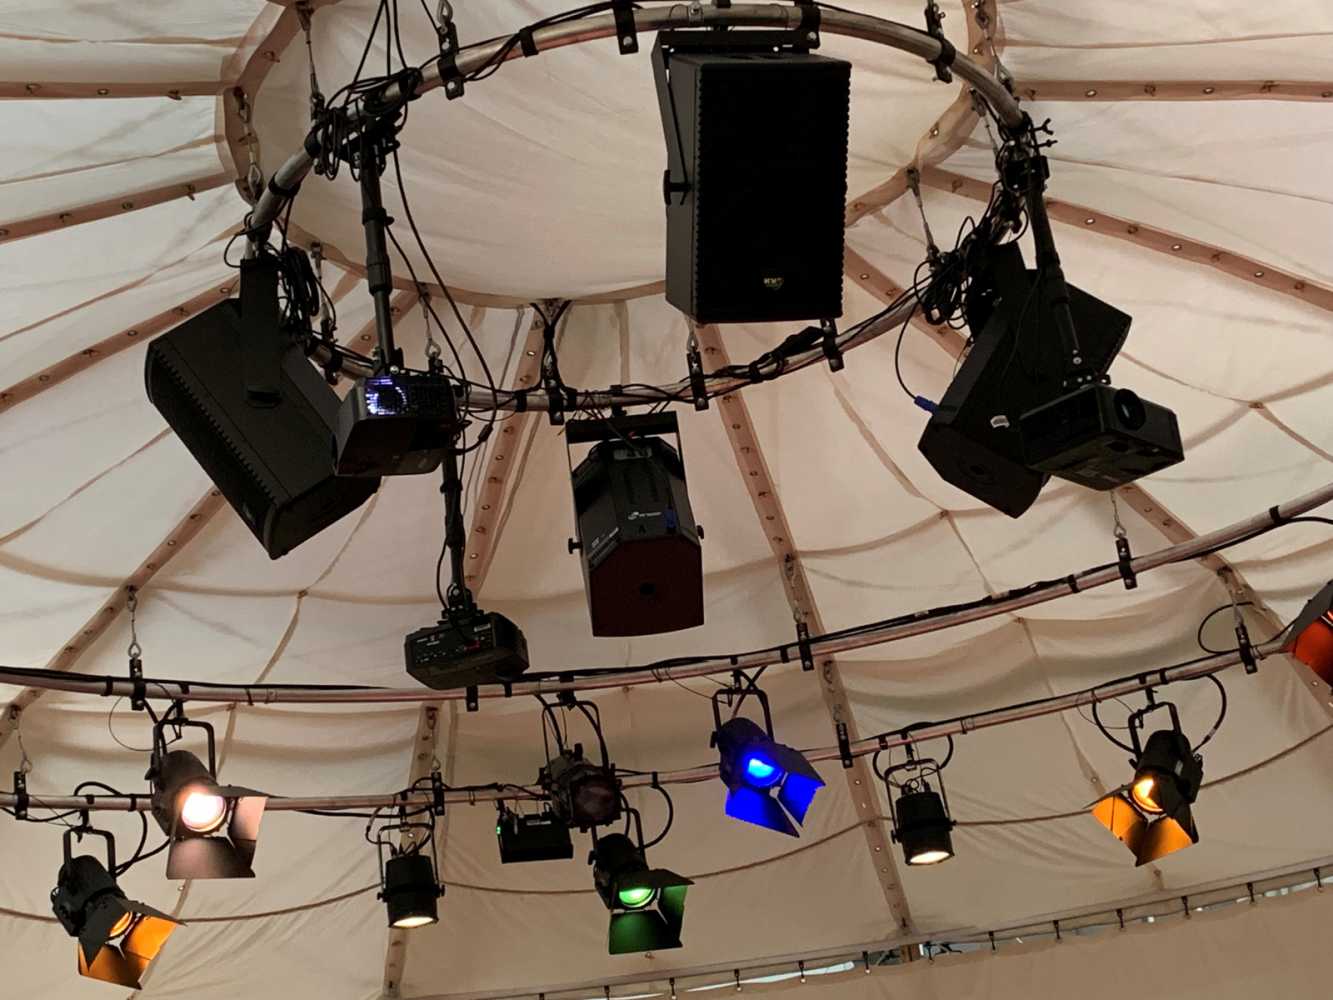 The installation included seven EX10 compact active loudspeaker systems from KV2 Audio